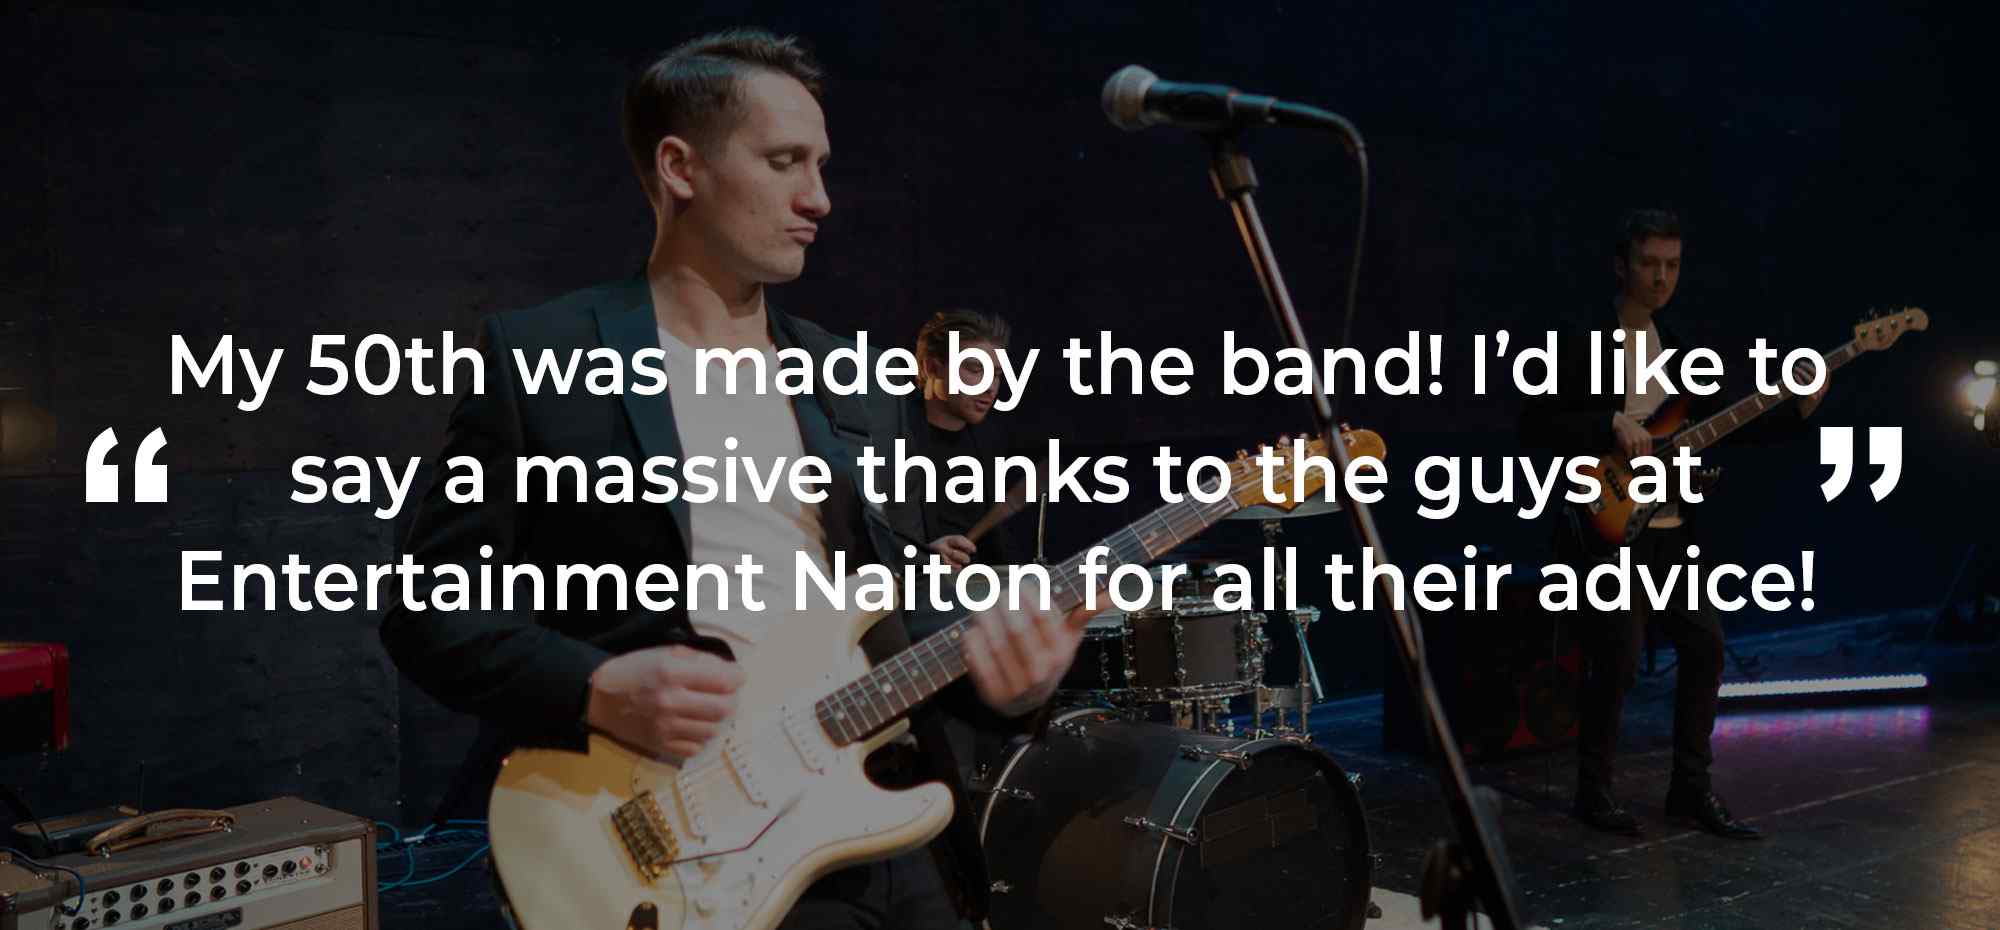 Client Review of a Party Band Cambridgeshire